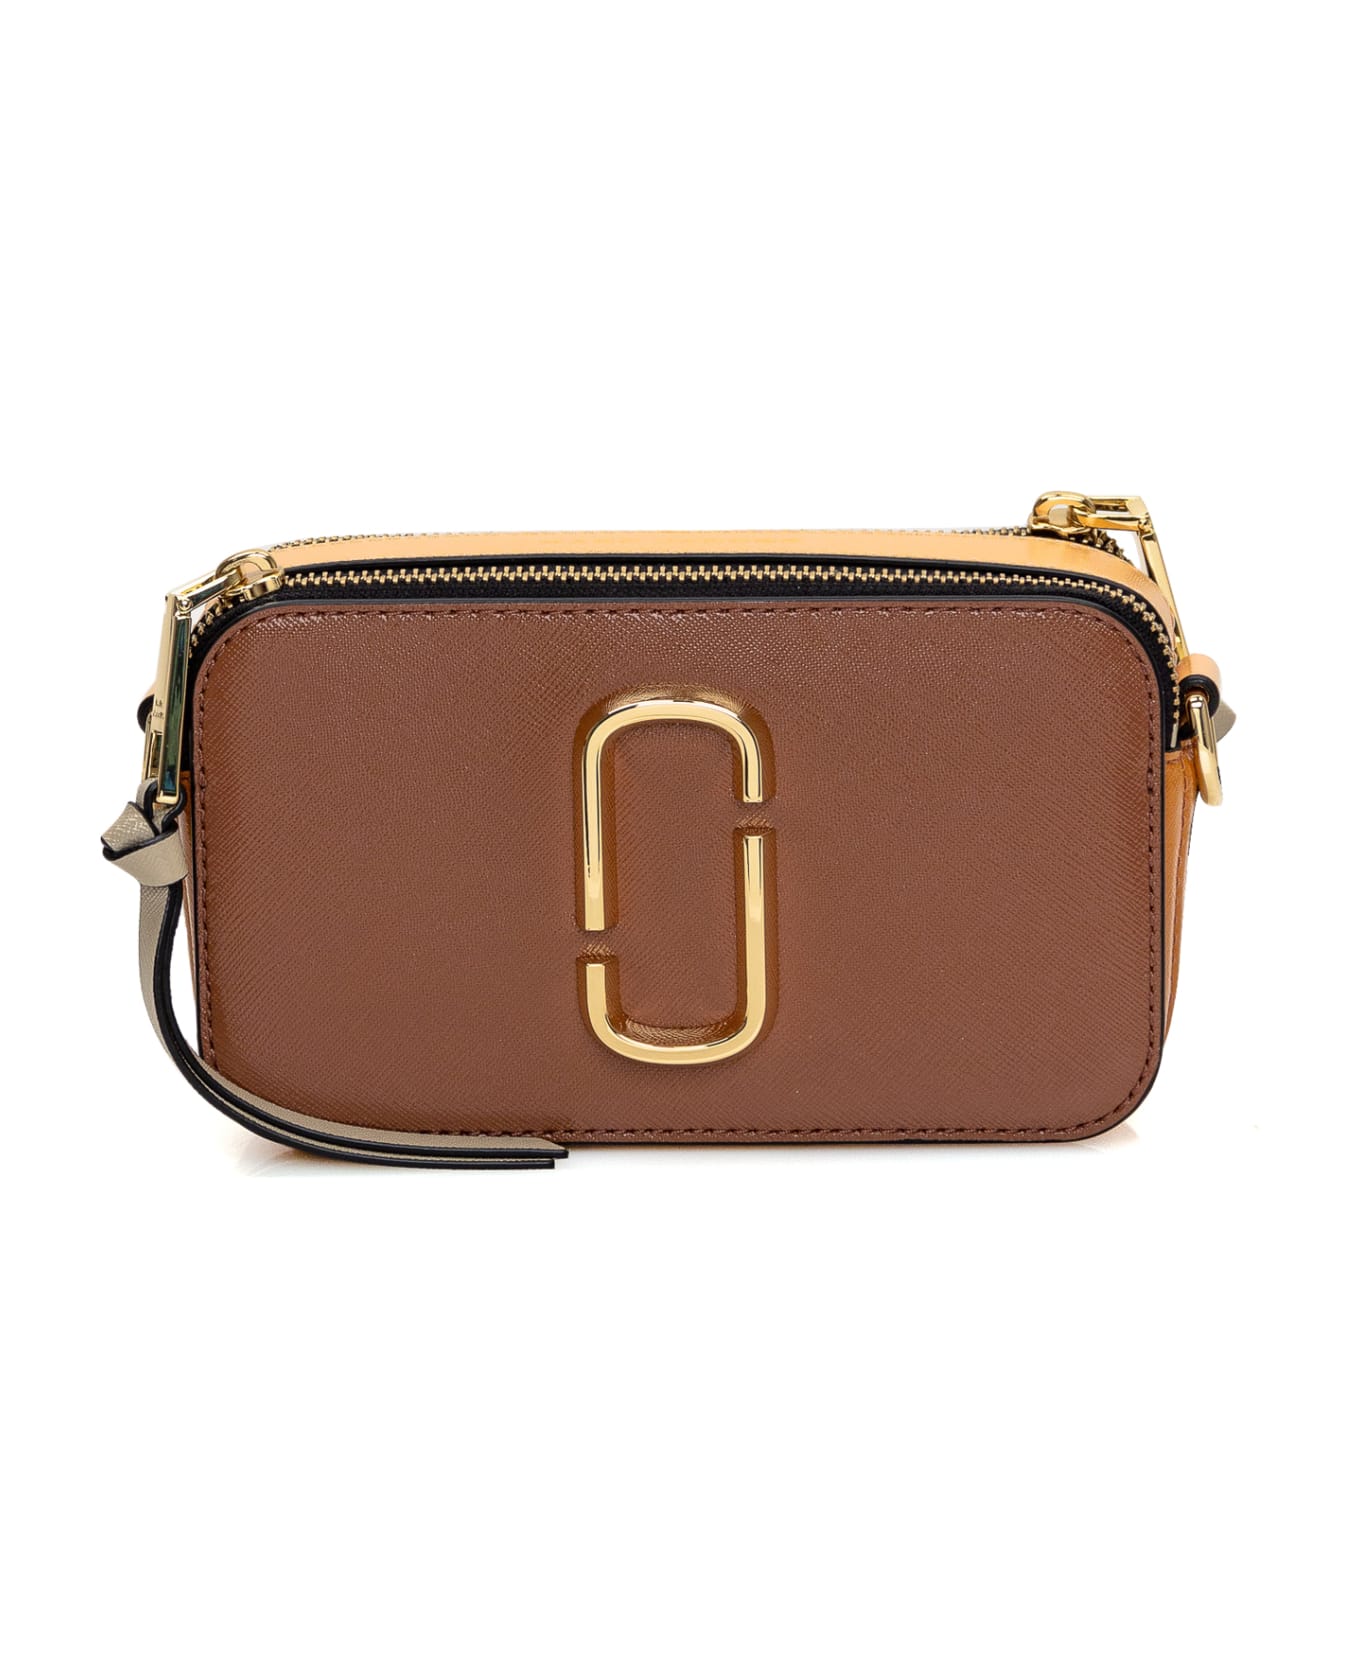 Marc Jacobs 'the Snapshot' Leather Bag - Brown ショルダーバッグ